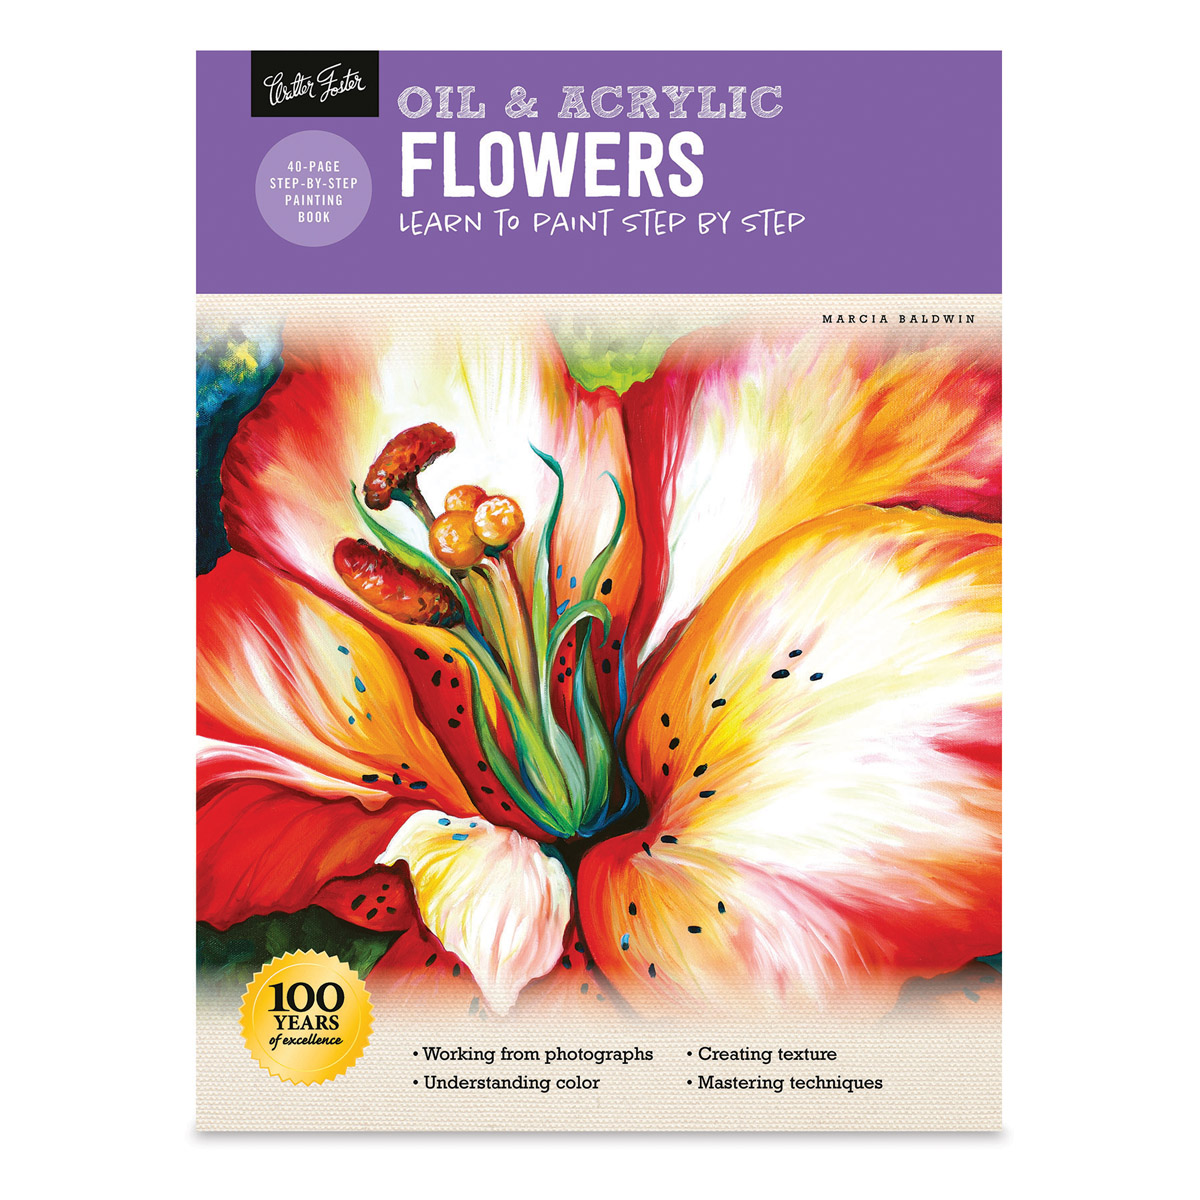 Oil & Acrylic: Flowers: Learn to Paint Step by Step [Book]